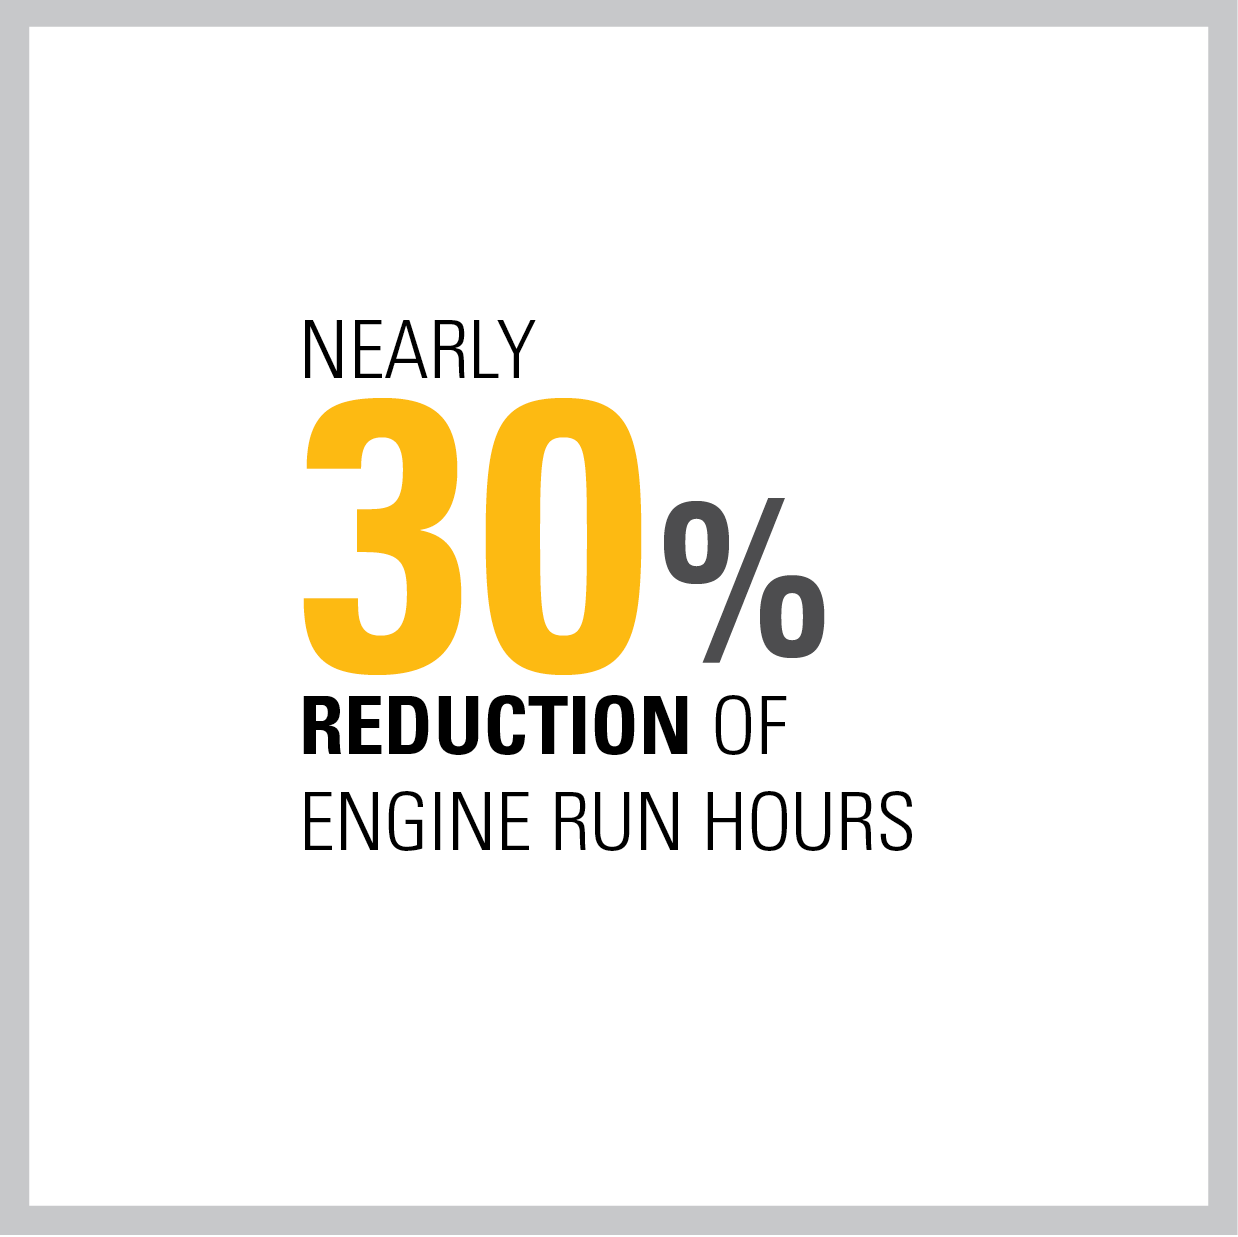 Nearly 30% reduction of engine run hours